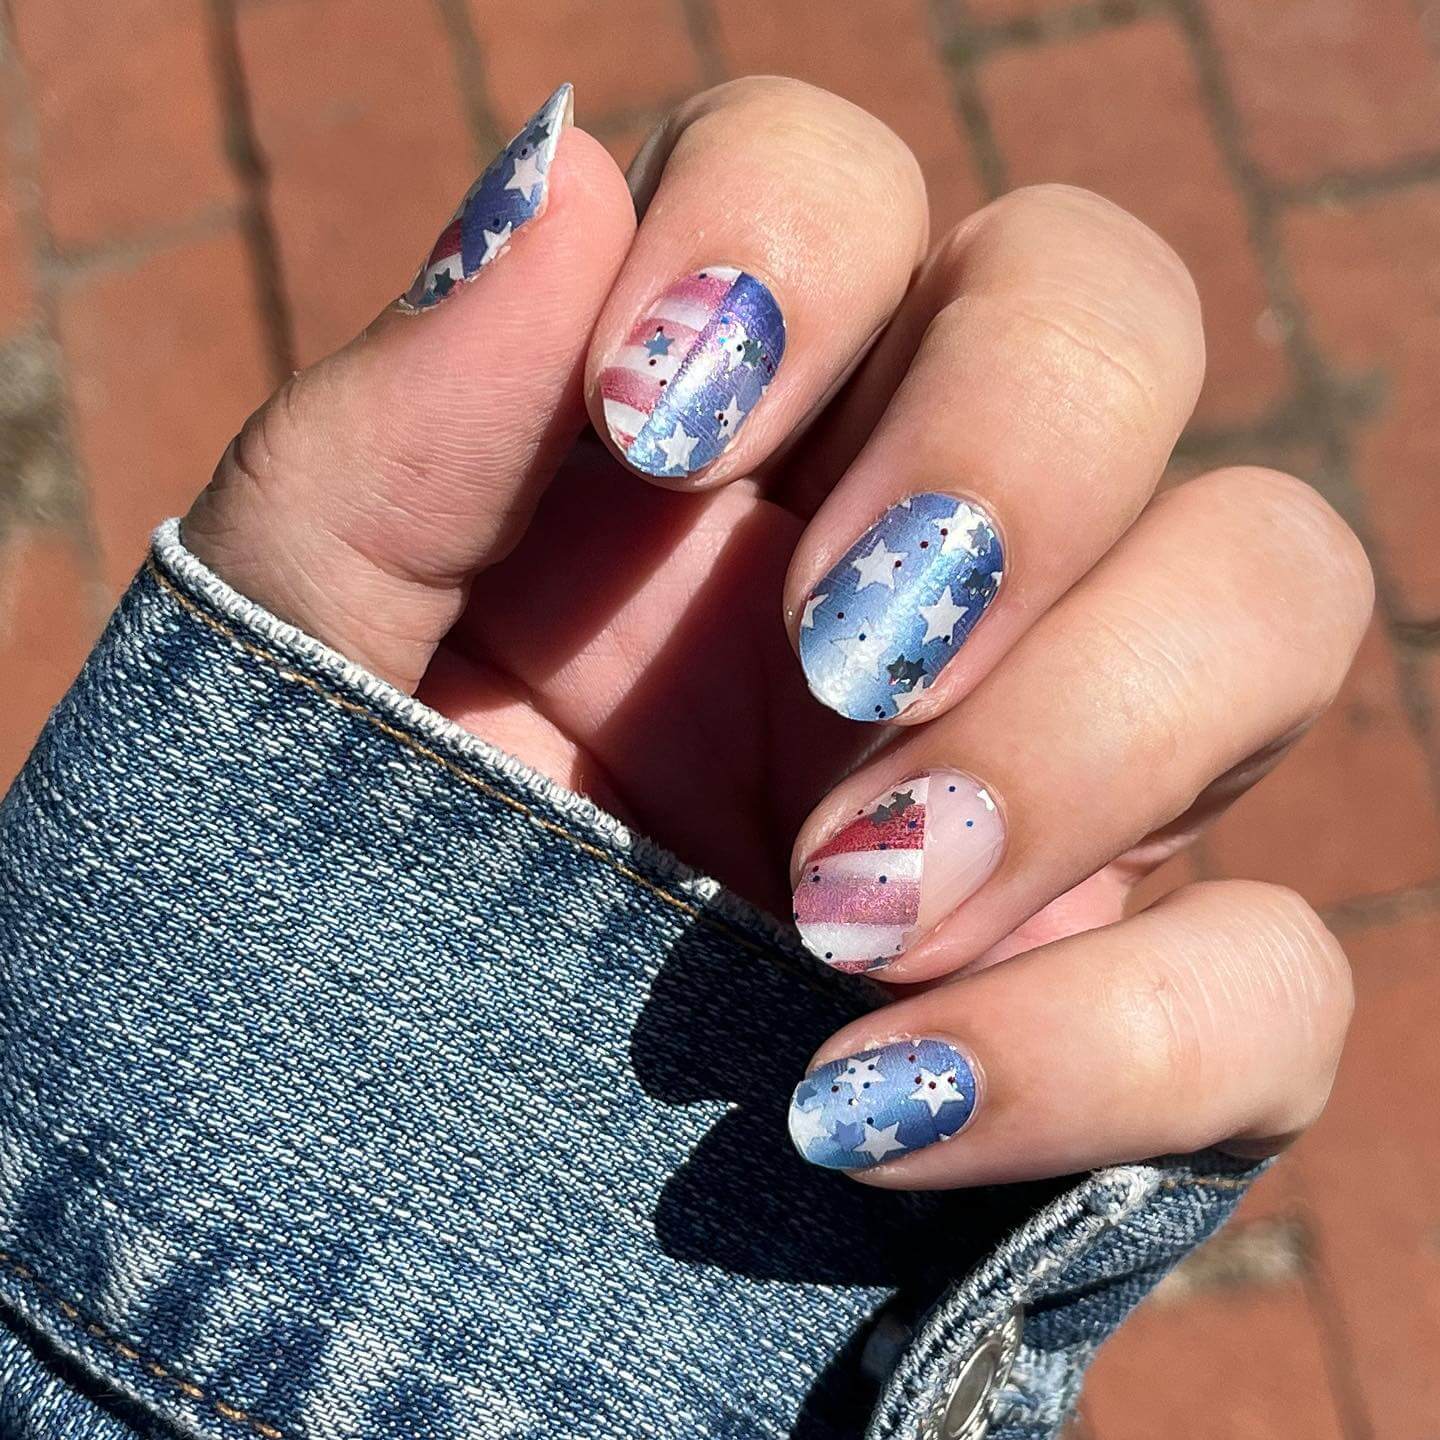 american flag Press-on Nails